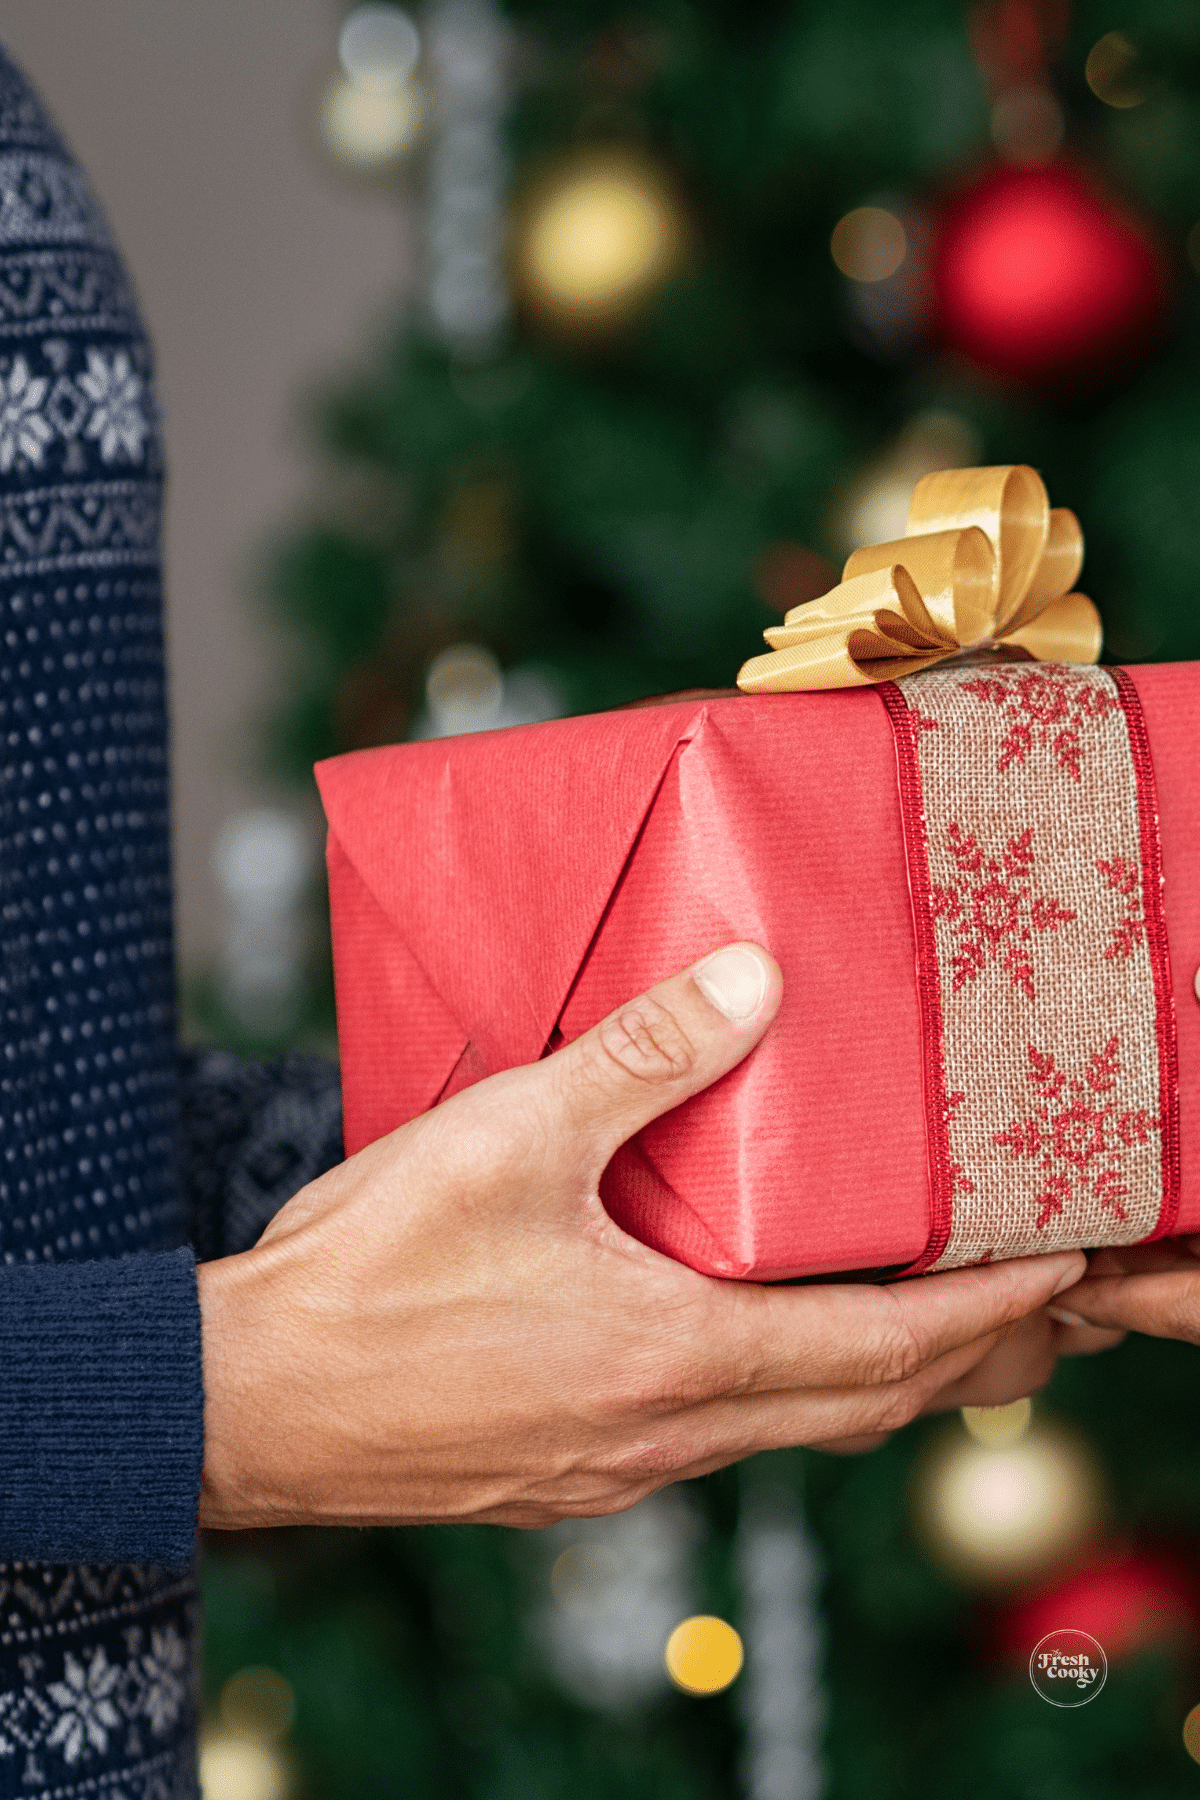 Man's hands holding a Christmas gift wrapped with a tree behind.